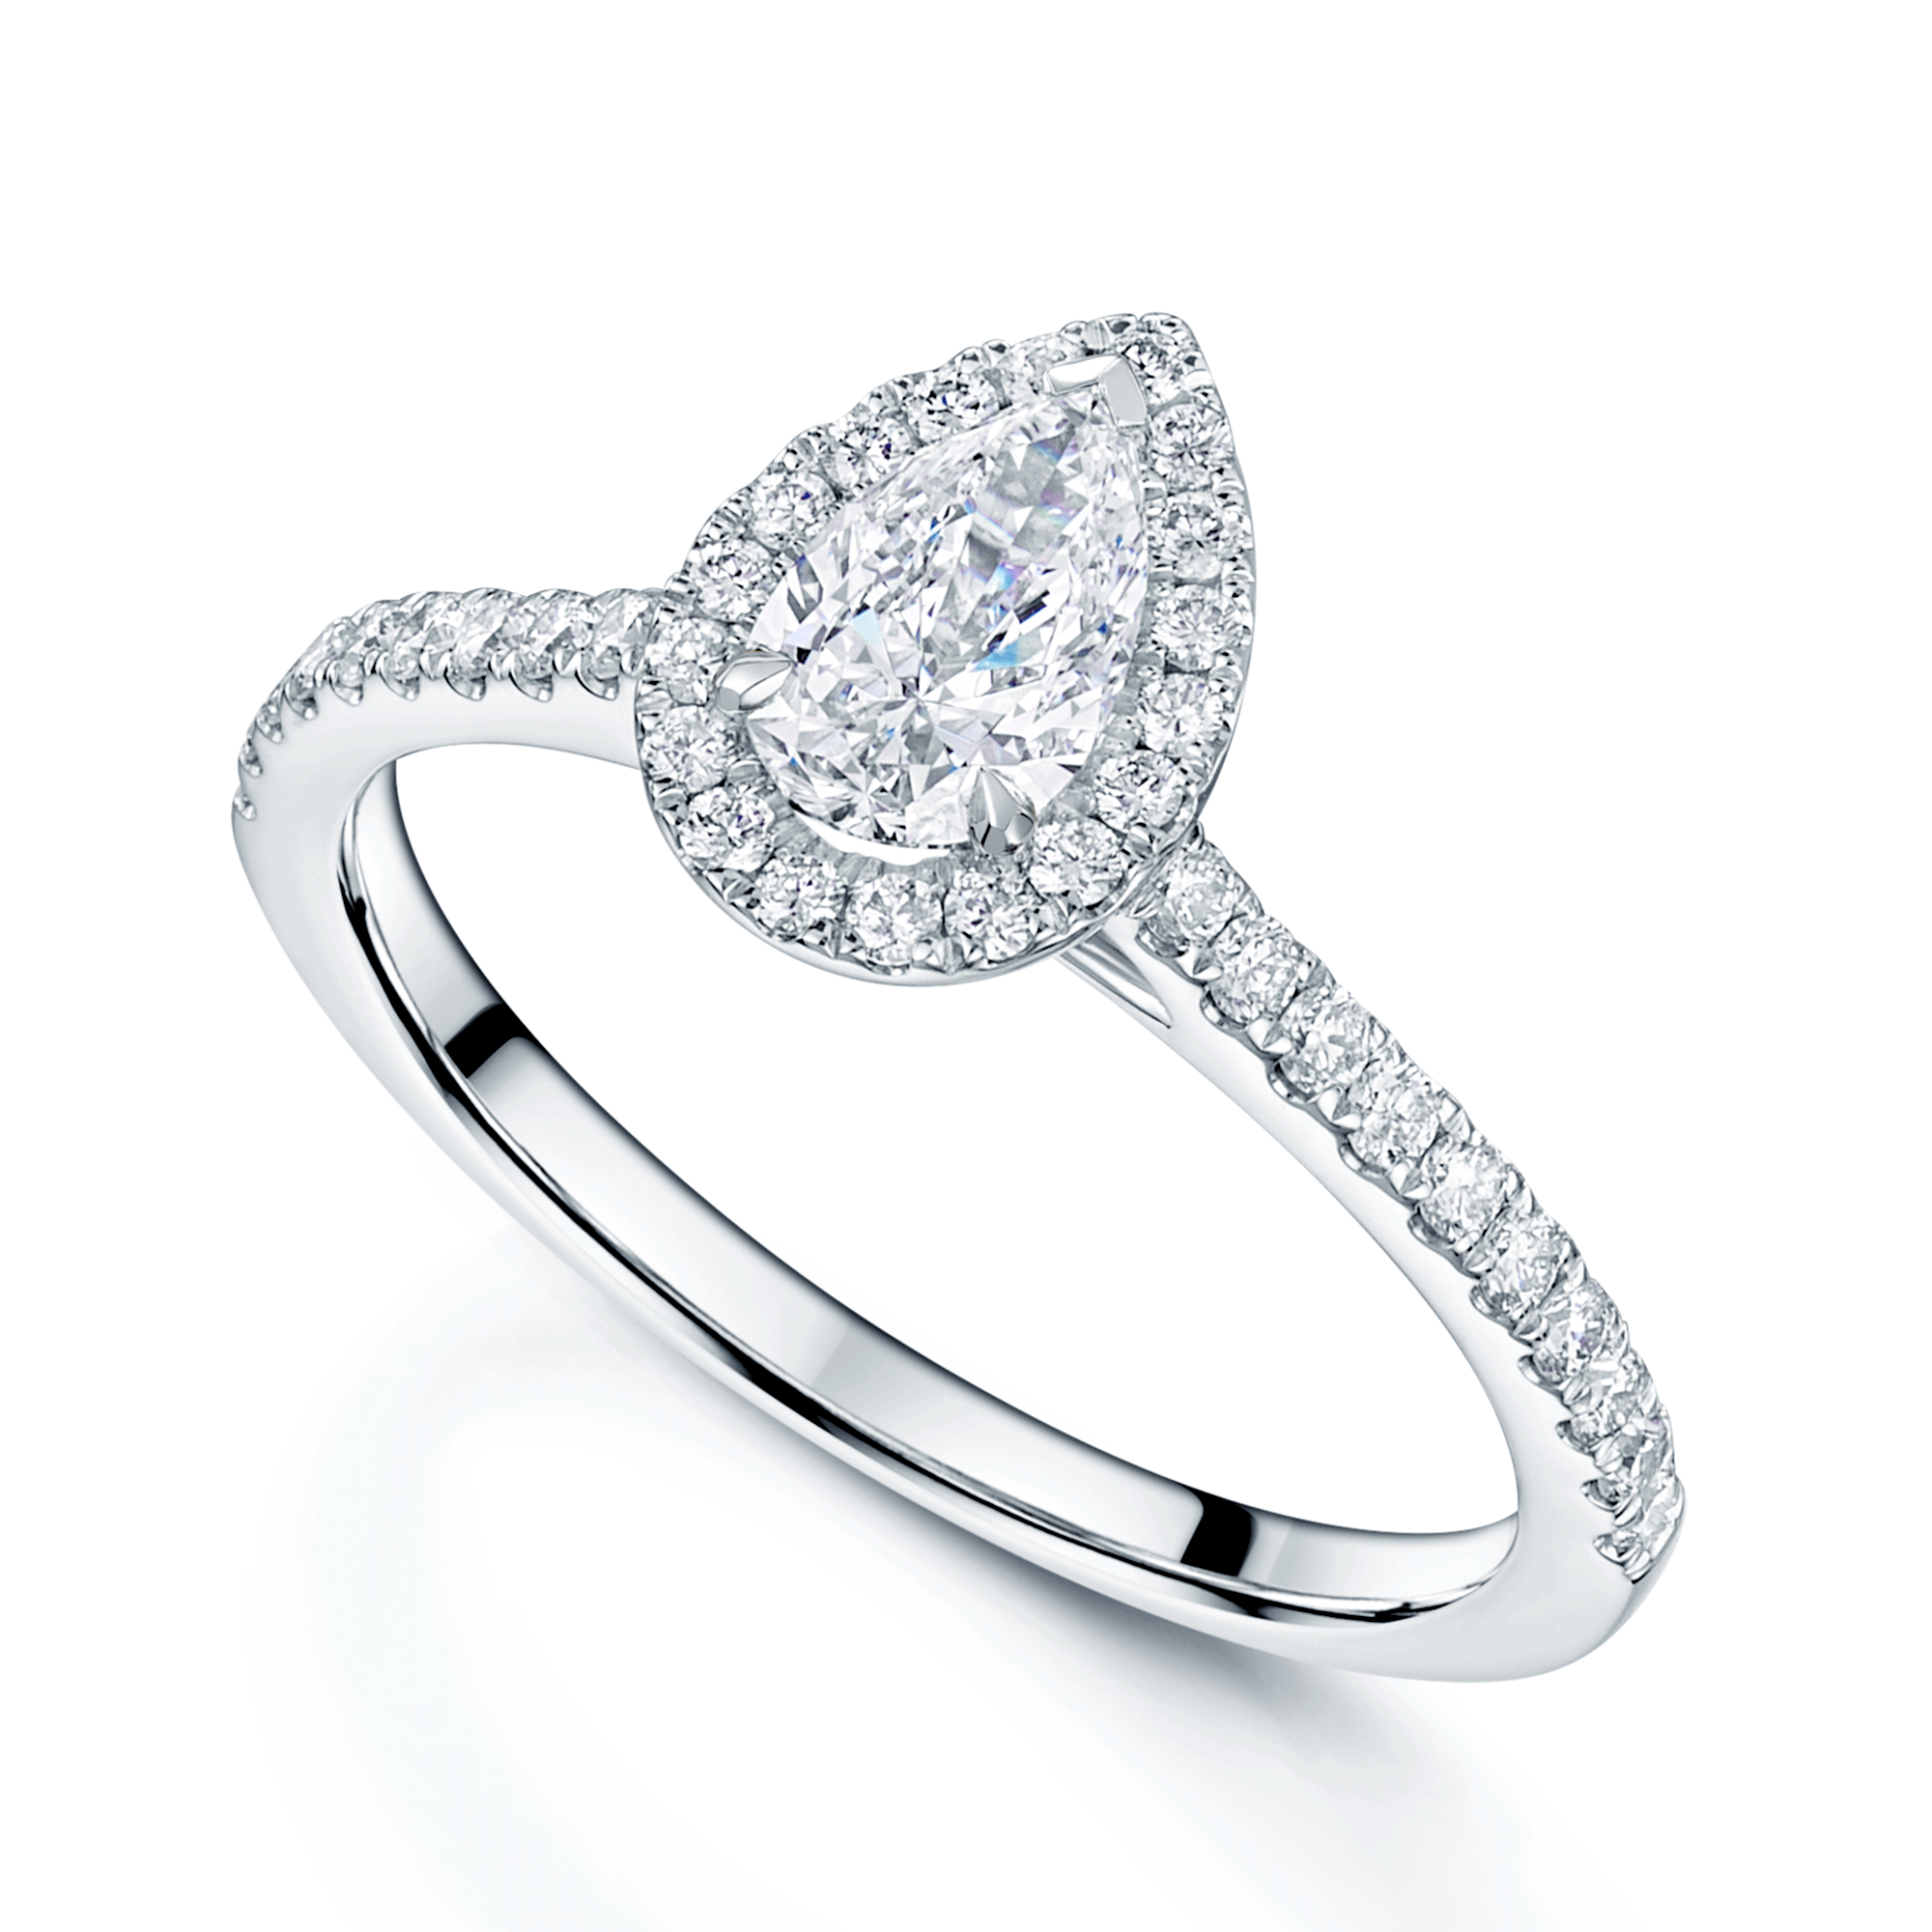 Platinum GIA Certificated Pear cut Diamond Halo Ring With Diamond Set Shoulders